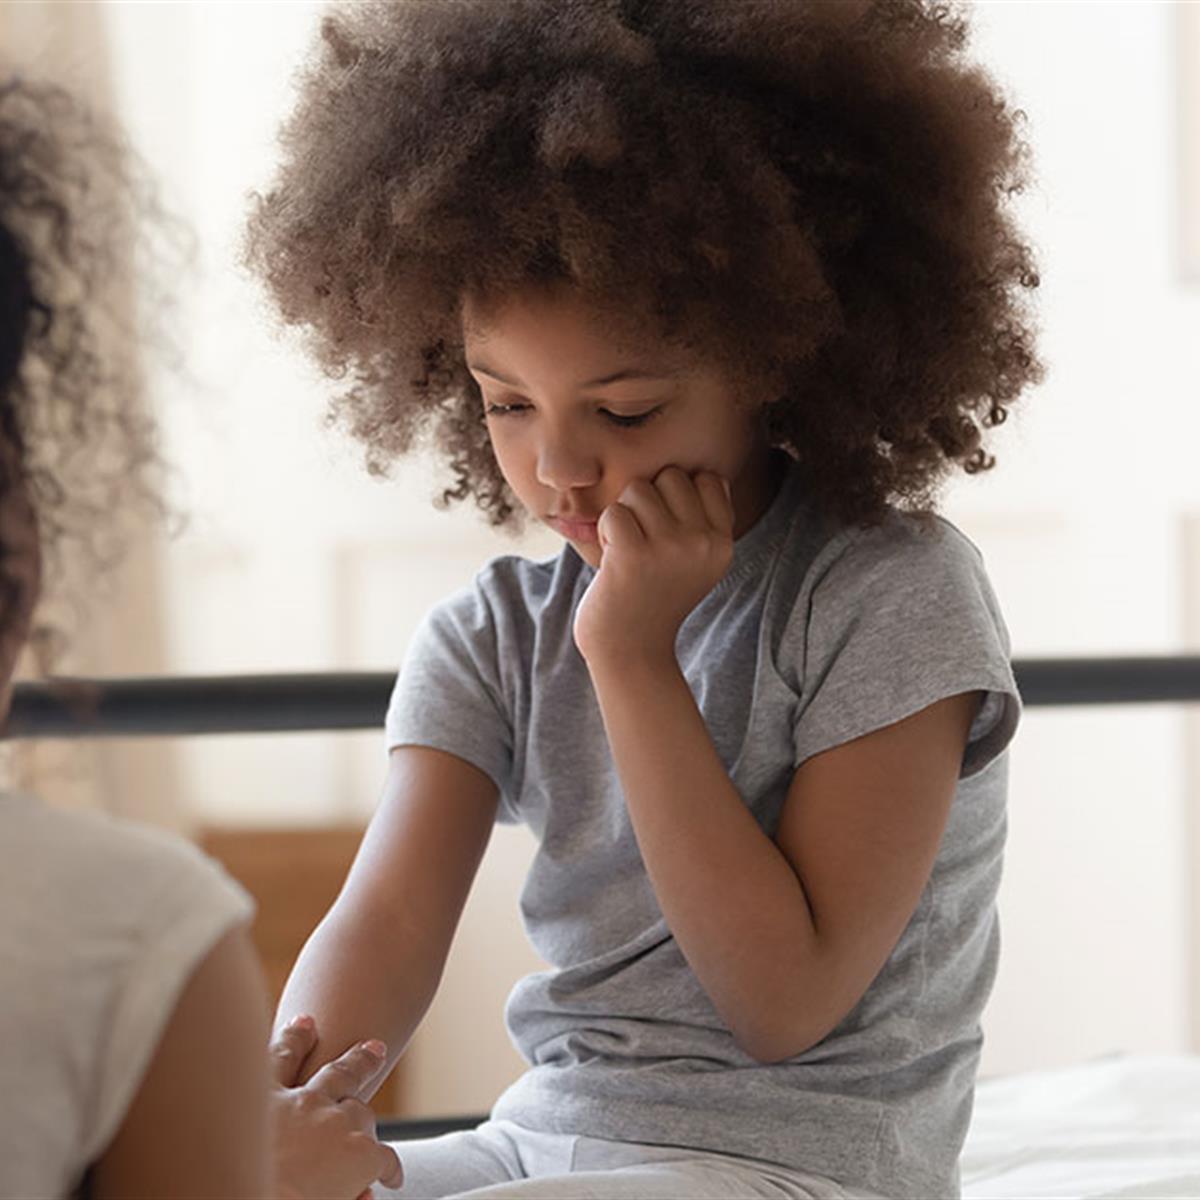 Sleeping Two Girls And One Boy Xvideo - How to Talk With Kids About Tragedies & Other Traumatic News Events -  HealthyChildren.org